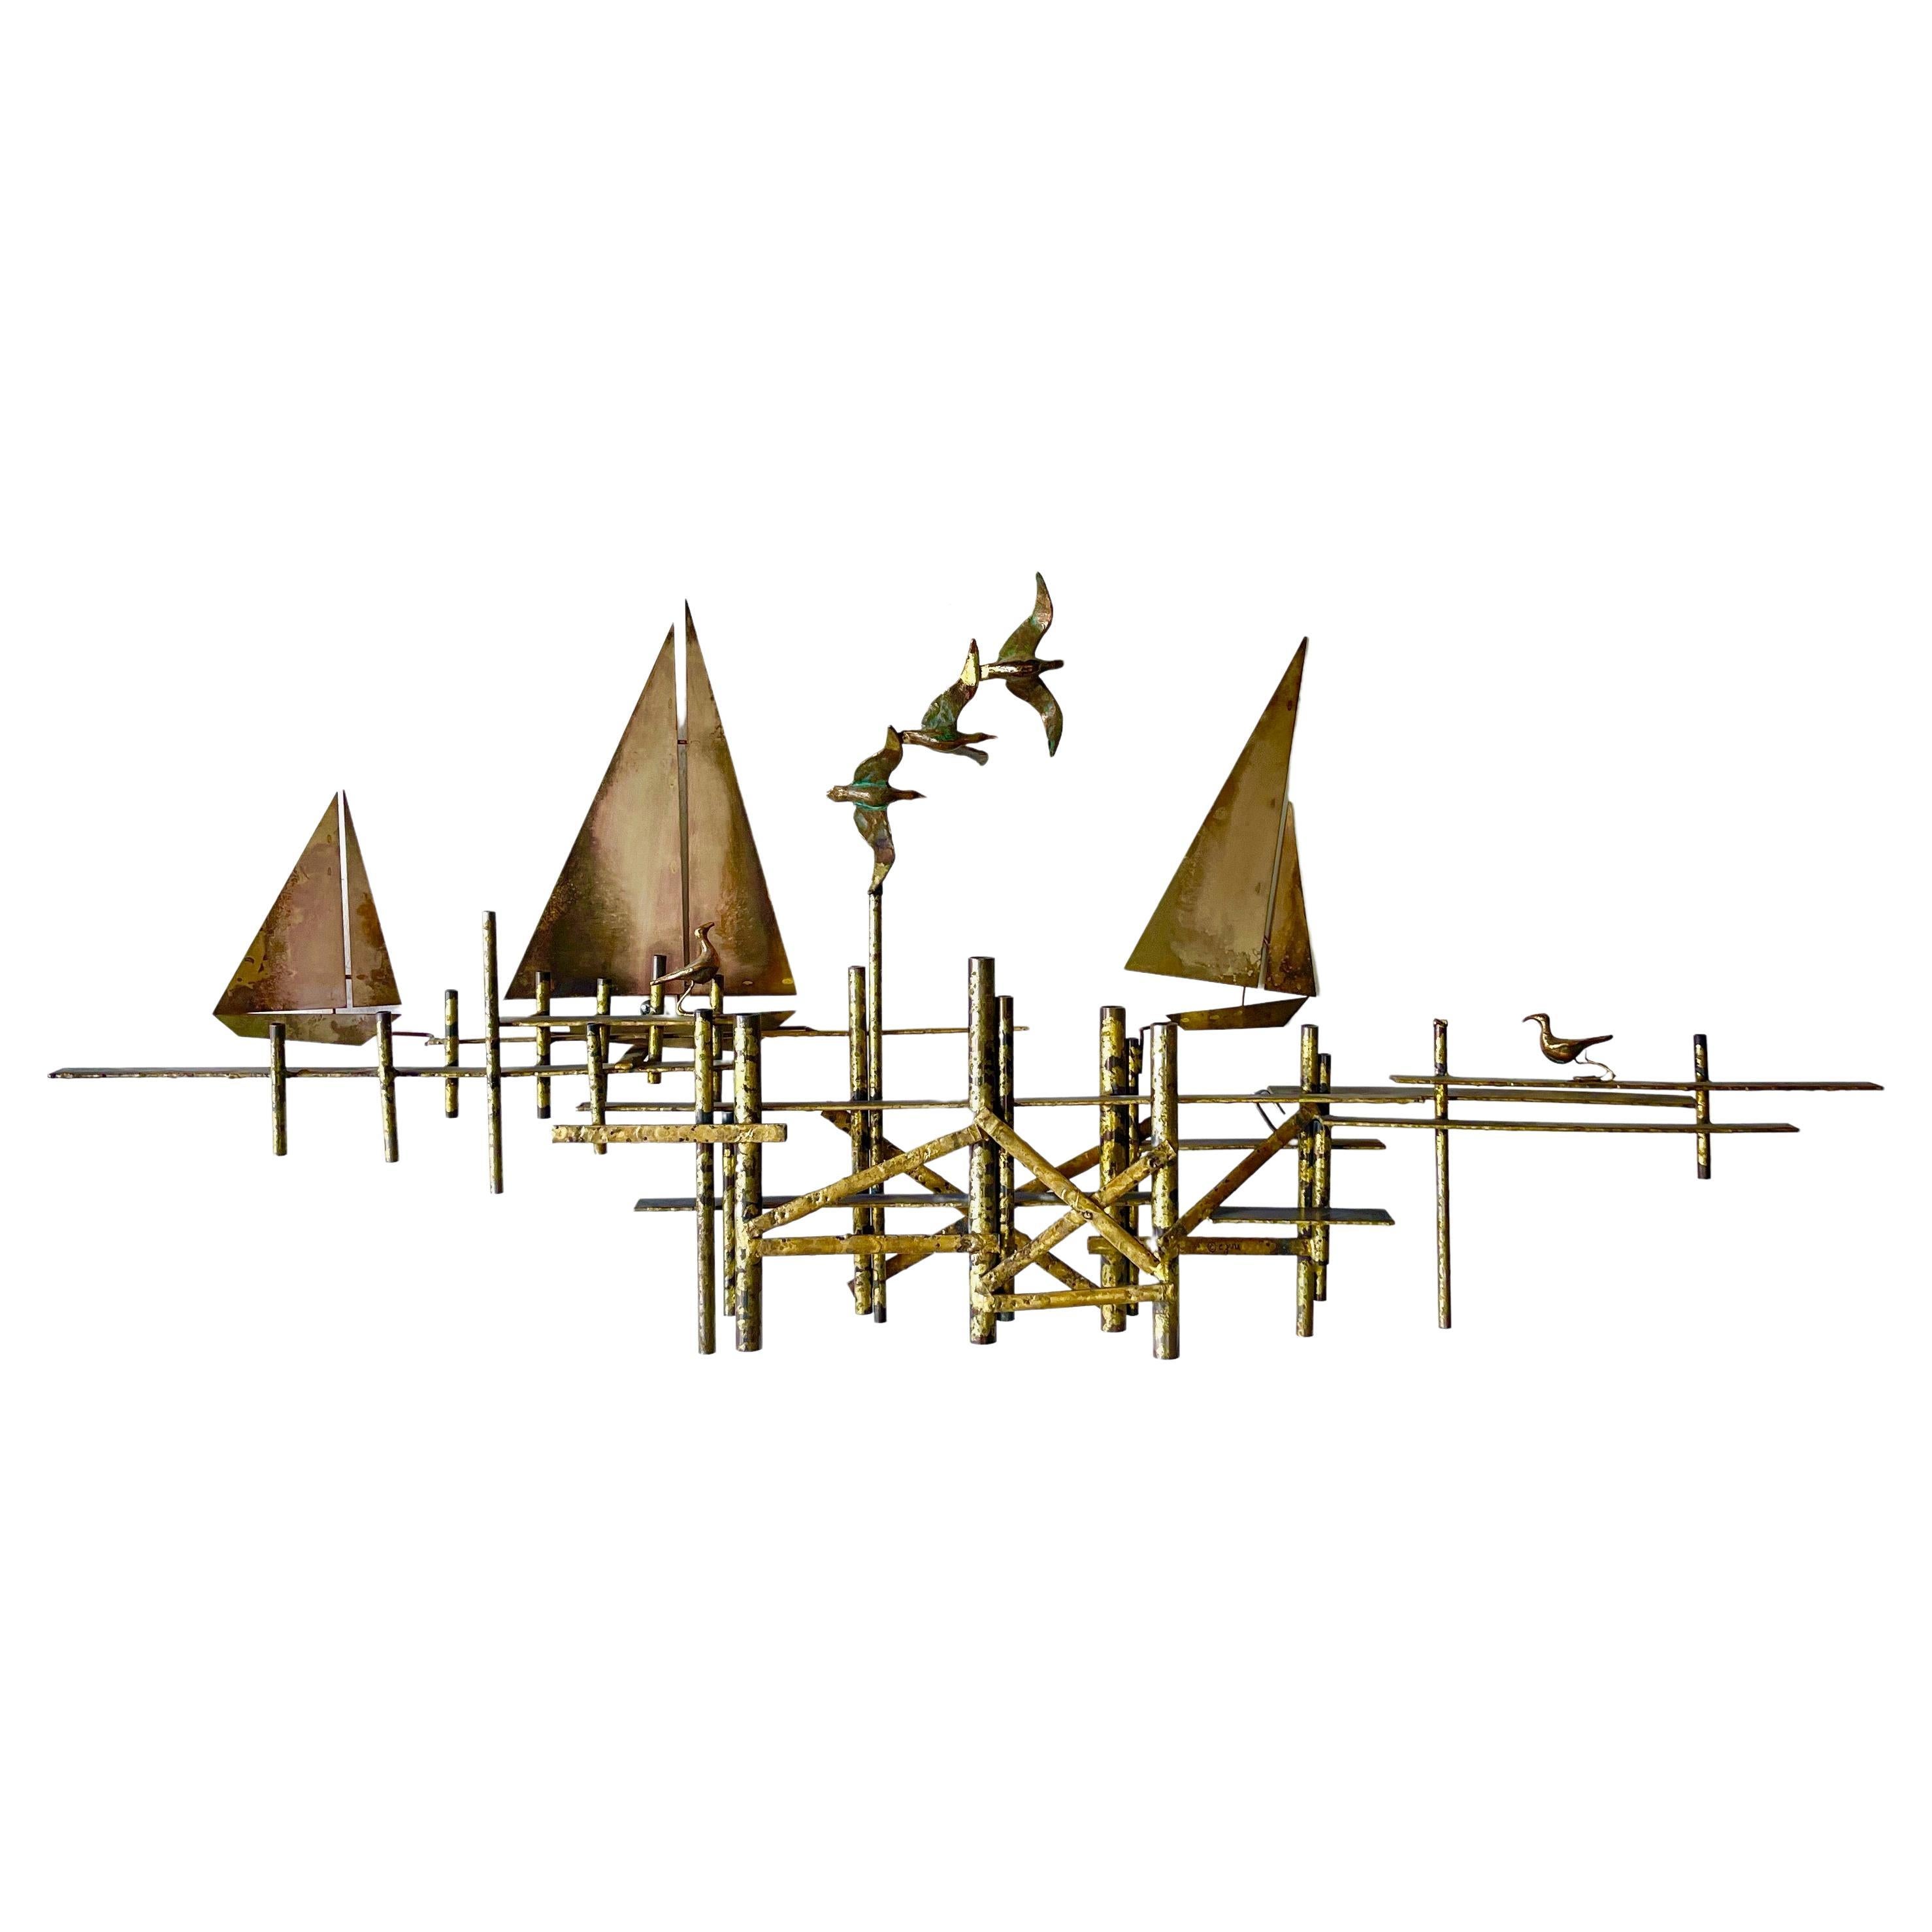 Curtis Jere Sailboat on Pier / Dock Wall Art Sculpture For Sale